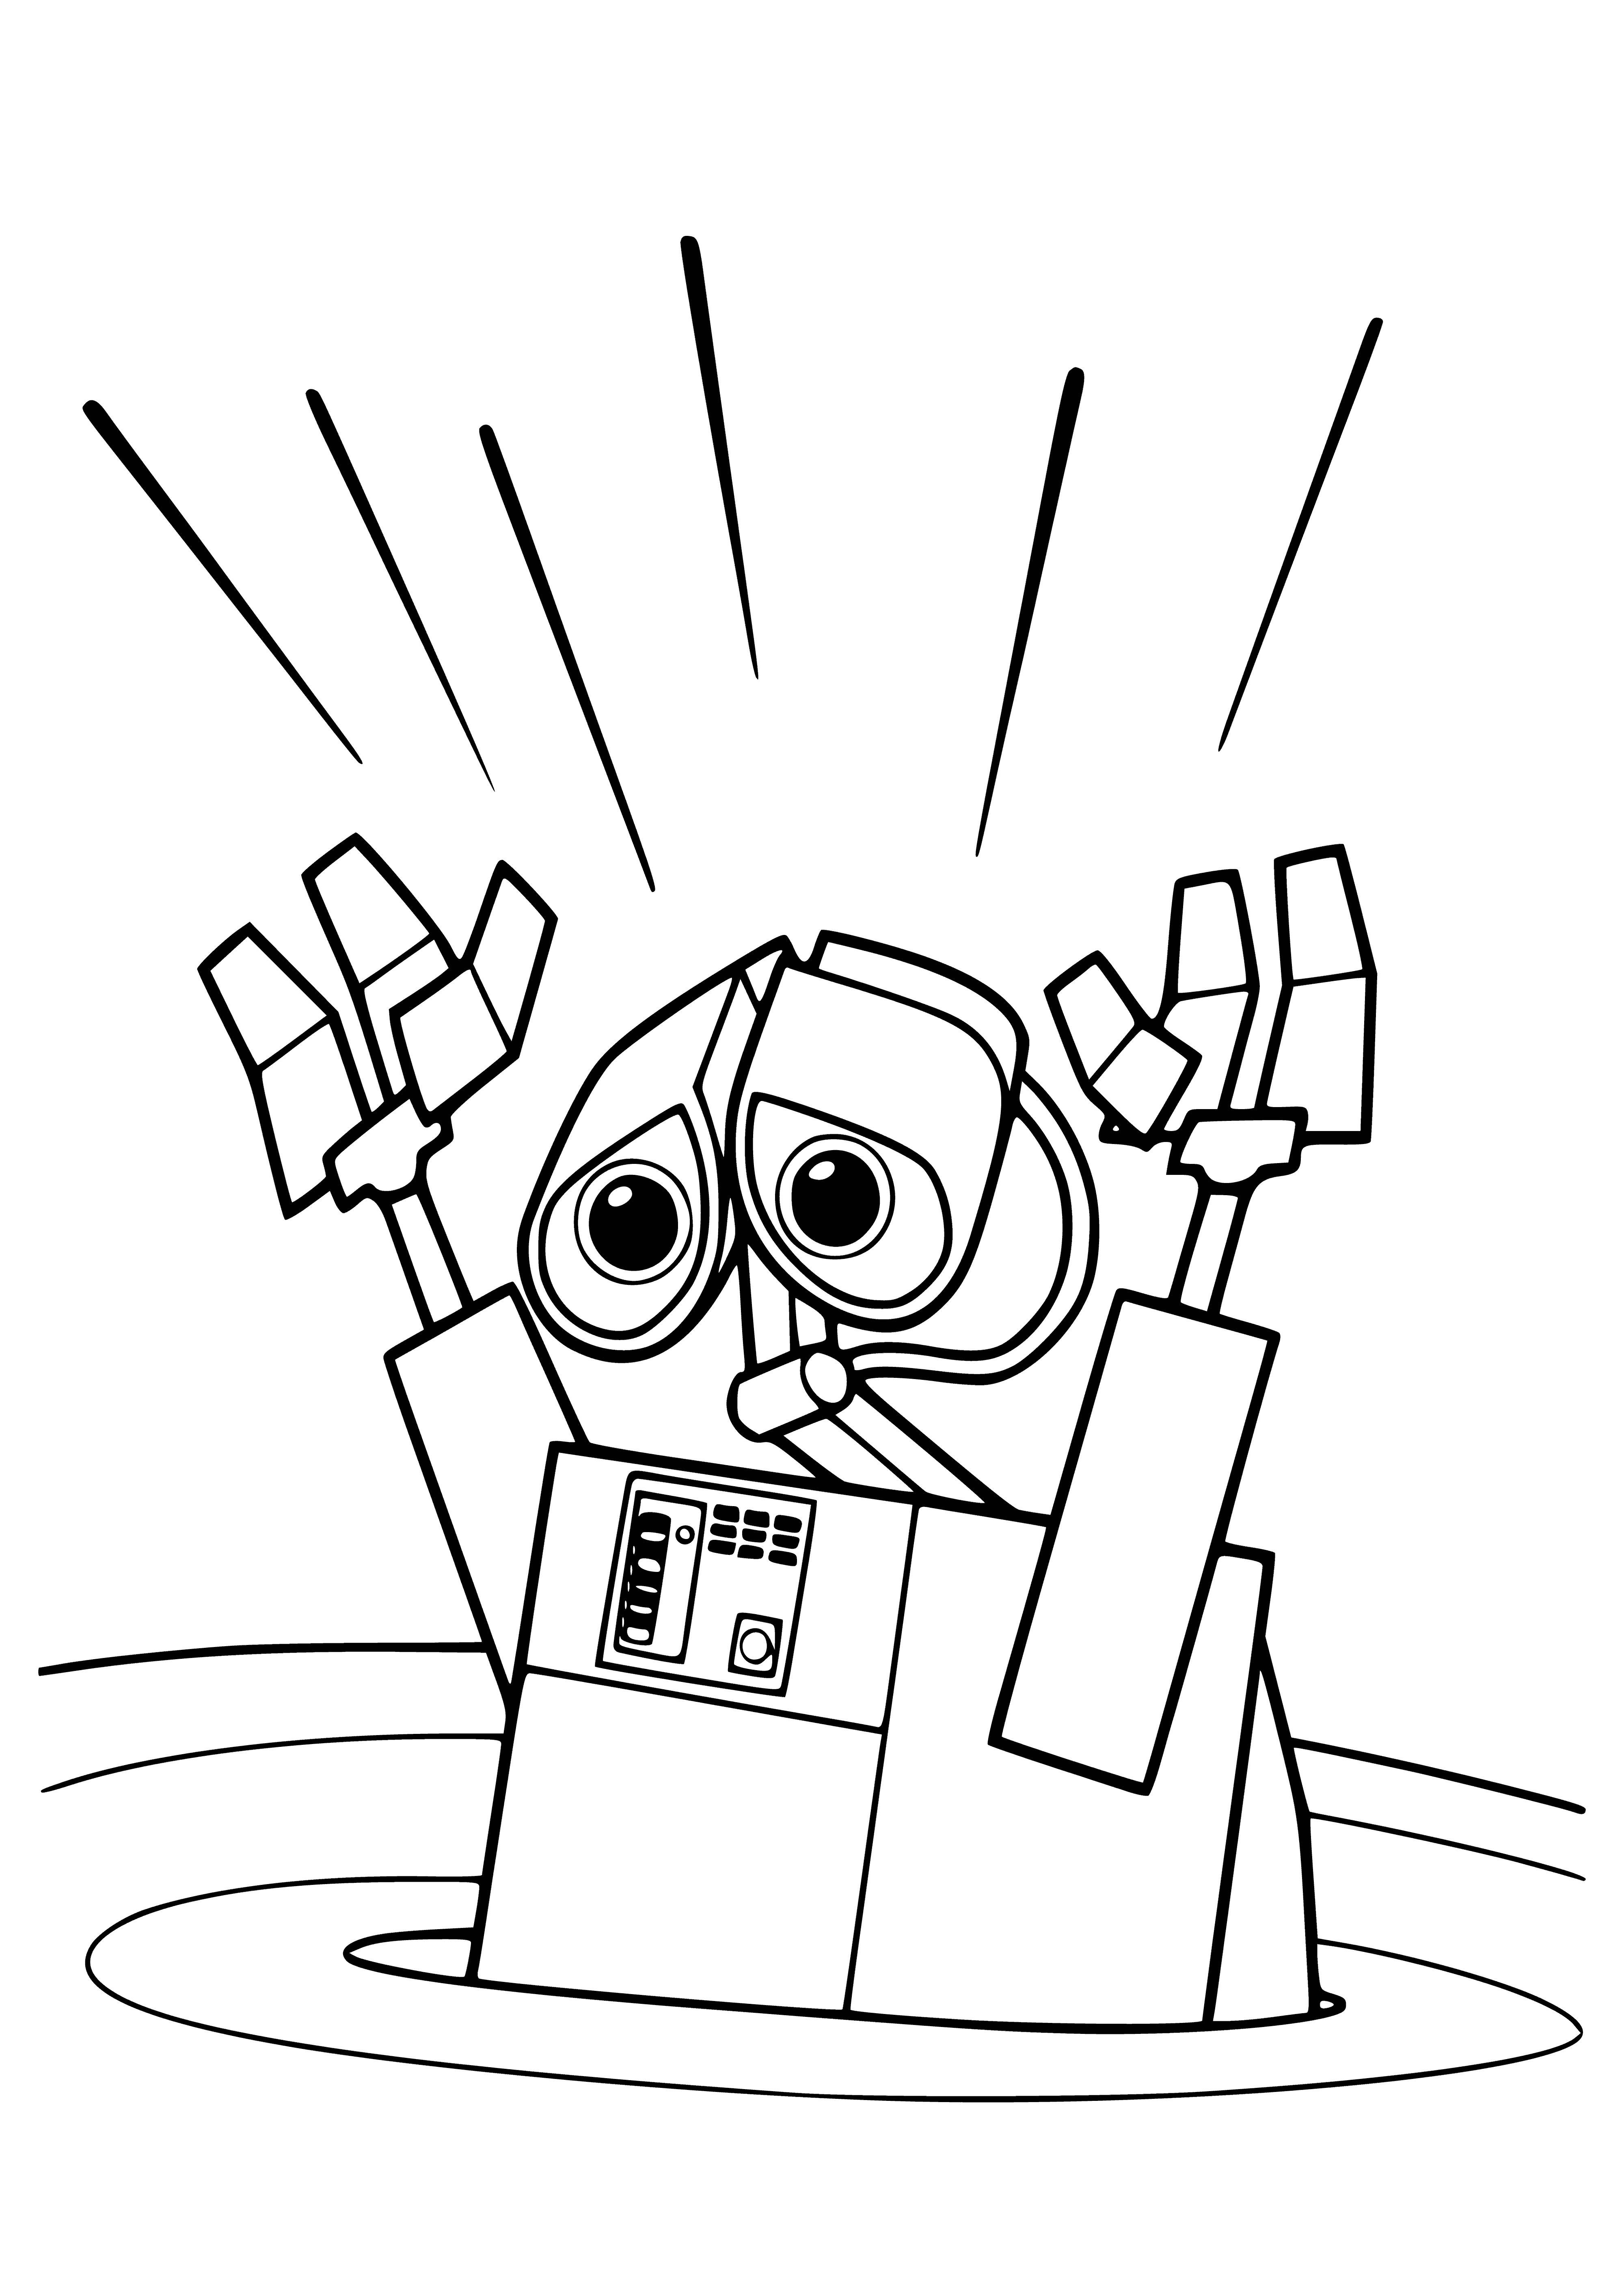 coloring page: A desolate, lifeless valley with no color or life; Wall-e Valley is a vast wasteland where nothing grows. #WalleValley